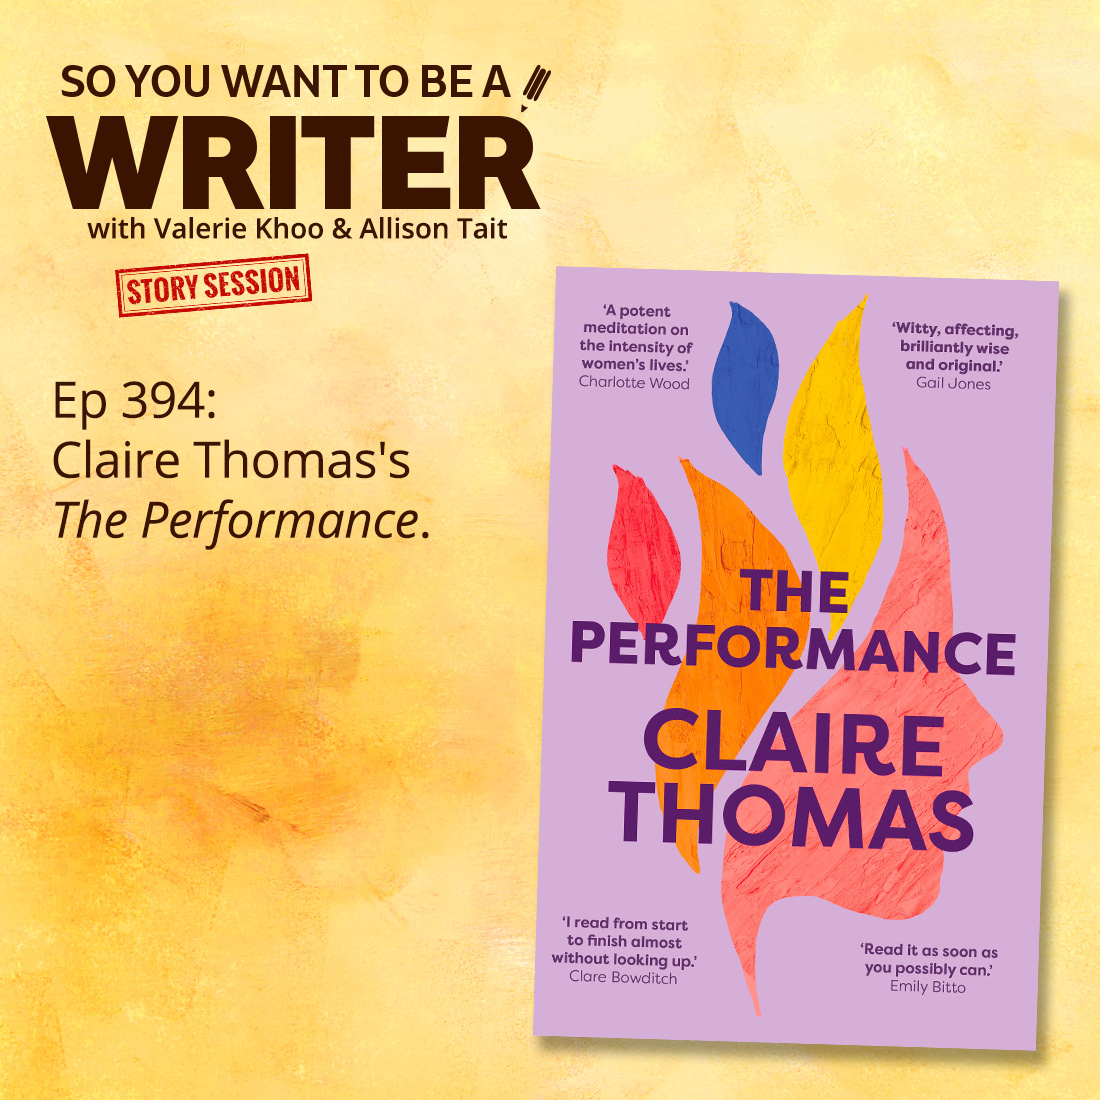 WRITER 394: Claire Thomas's 'The Performance' [Story Sessions series]